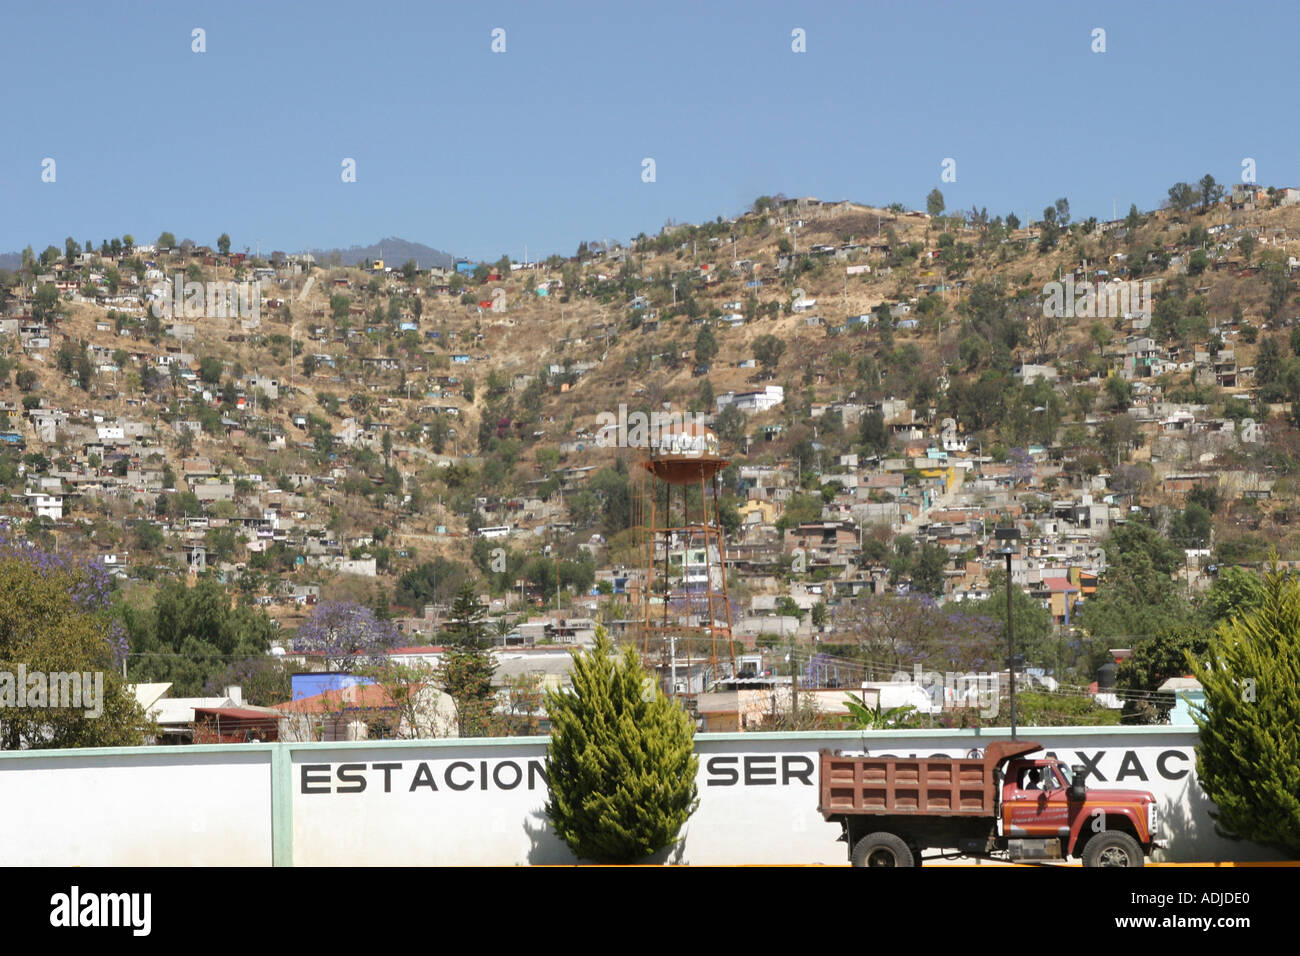 Shanty town on a hillside in the City of Oaxaca Mexico Stock Photo